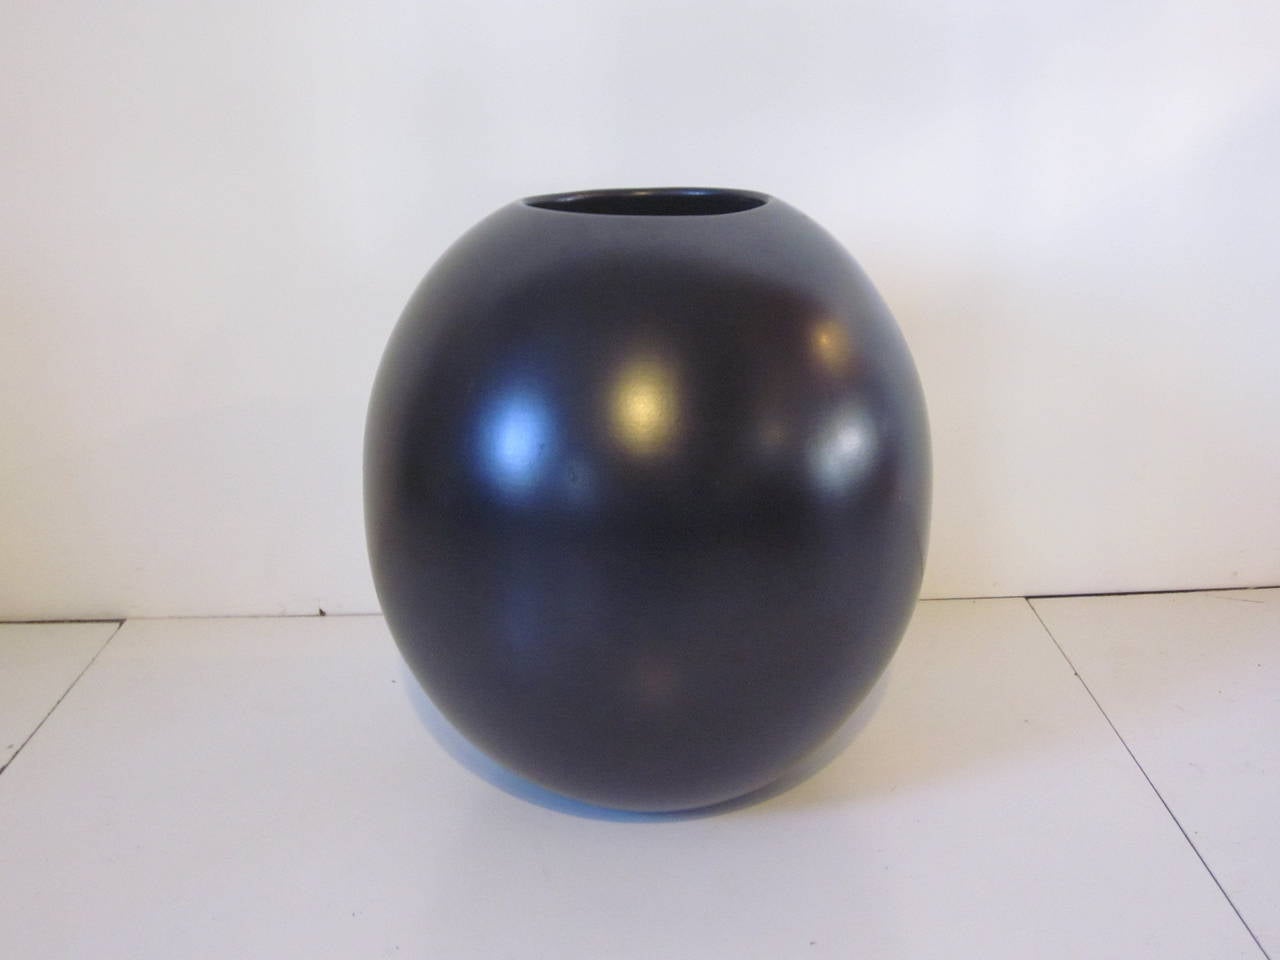 A satin black monumental Marilyn Kay Austin wide mouth high fired clay designer pot / planter. These pots came in a wide range of related shapes and sizes often used by designers, landscape architects and architects in the 1960s-1970s. manufactured